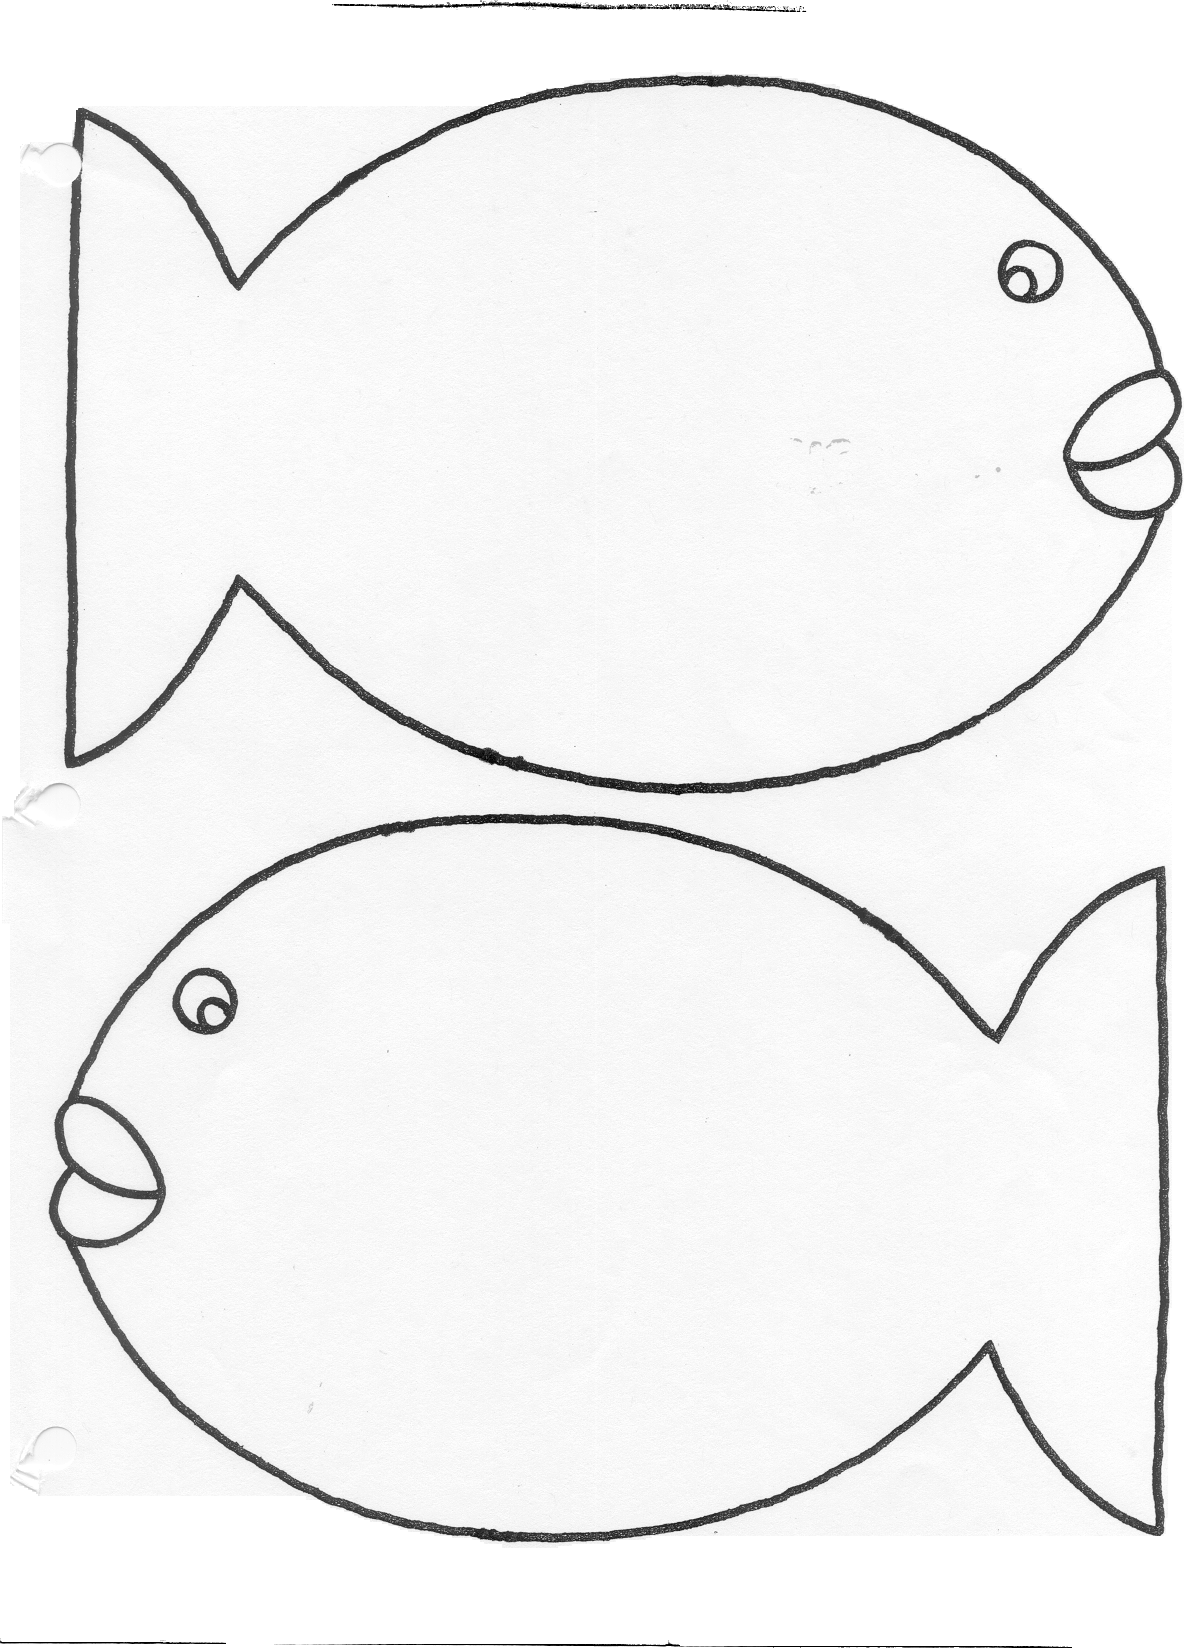 Fish Template With Scales Rainbow Cake Recipe From Scratch At Out ...